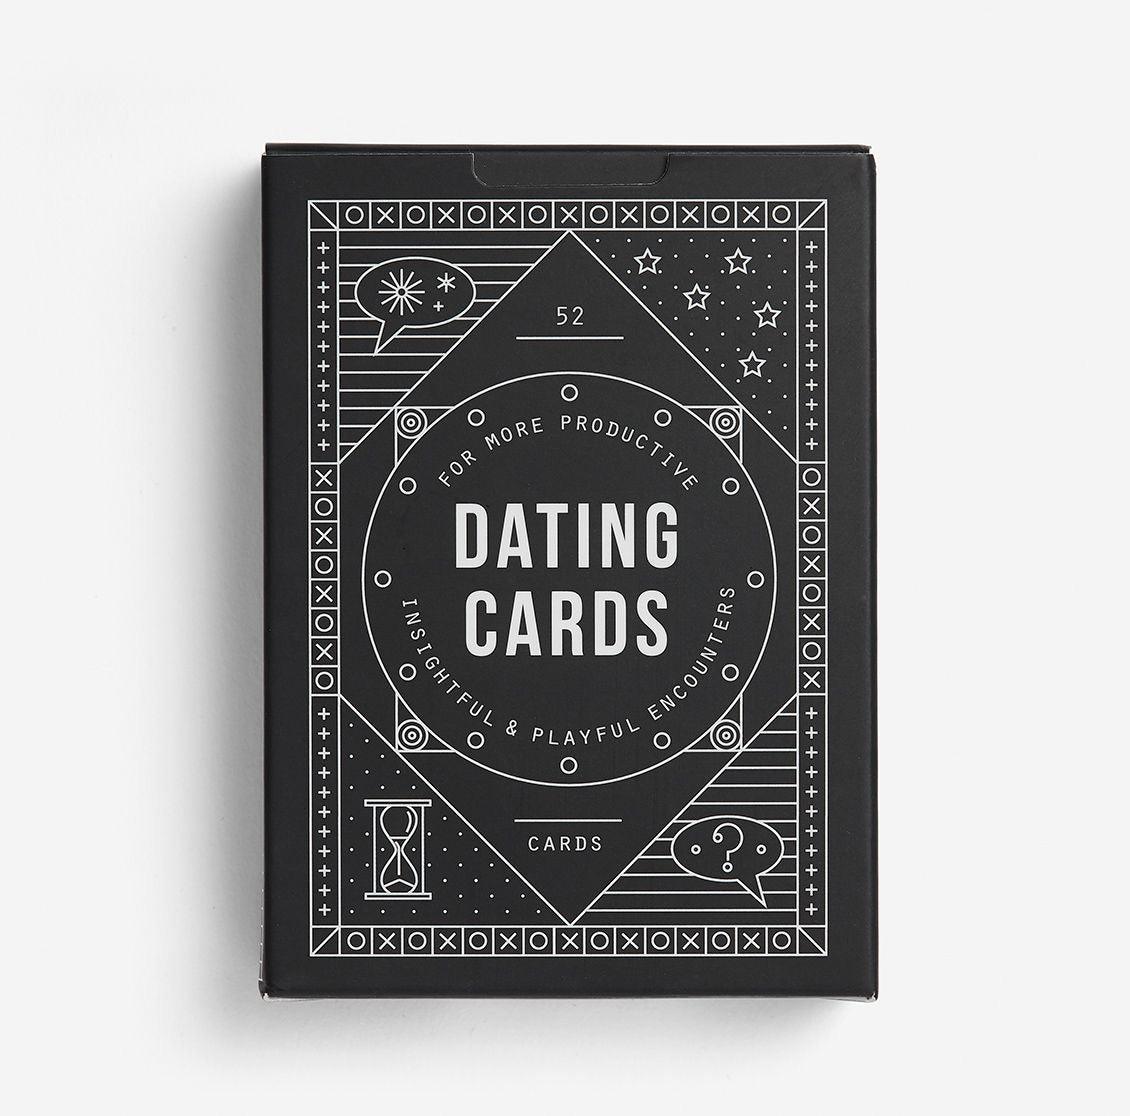 Dating Card Set by The School Of Life - Happy Valley The School Of Life Card Set